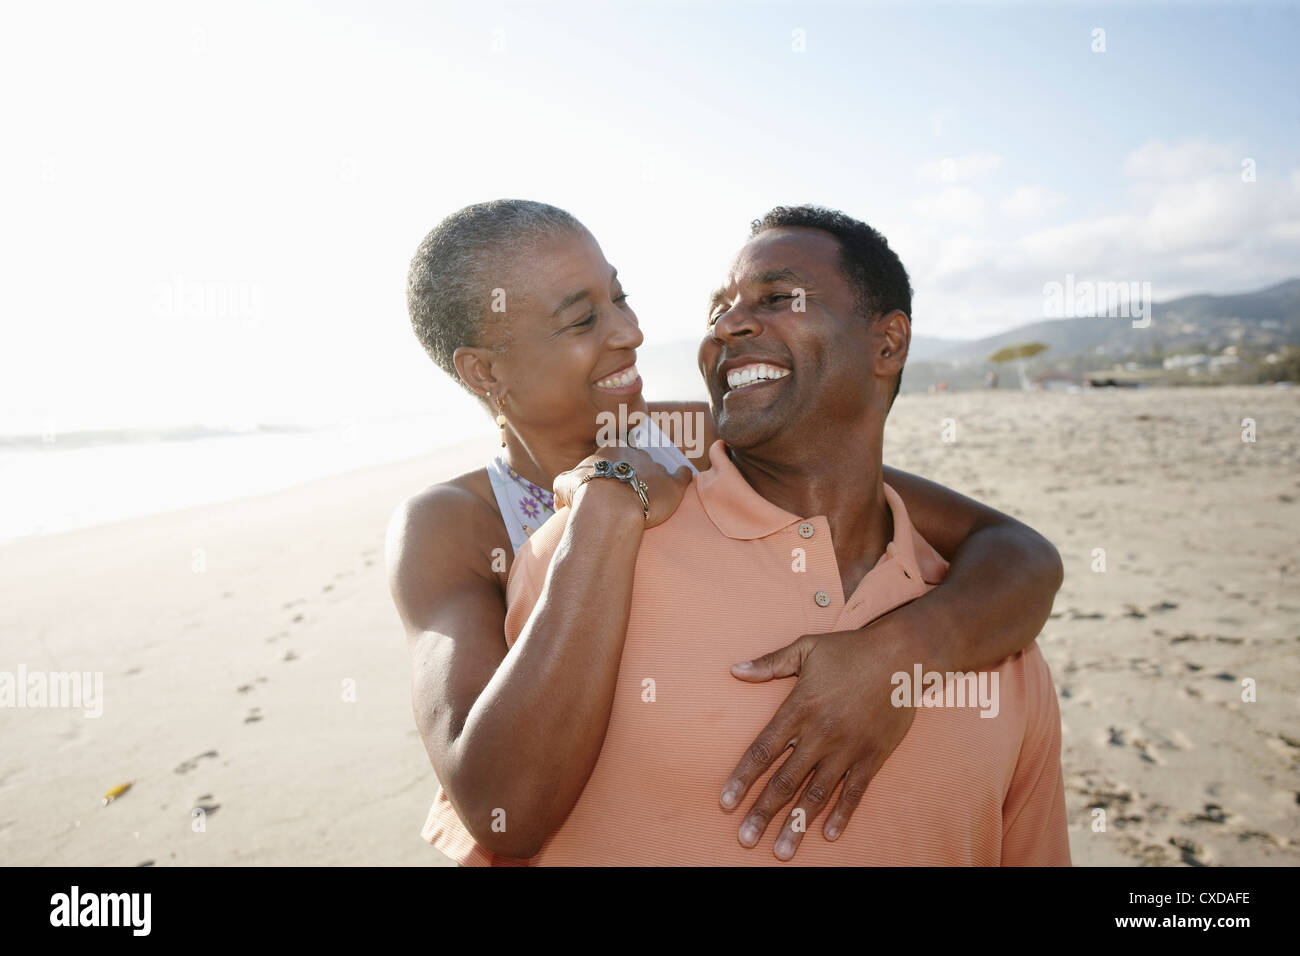 Black couple hugging on beach Banque D'Images